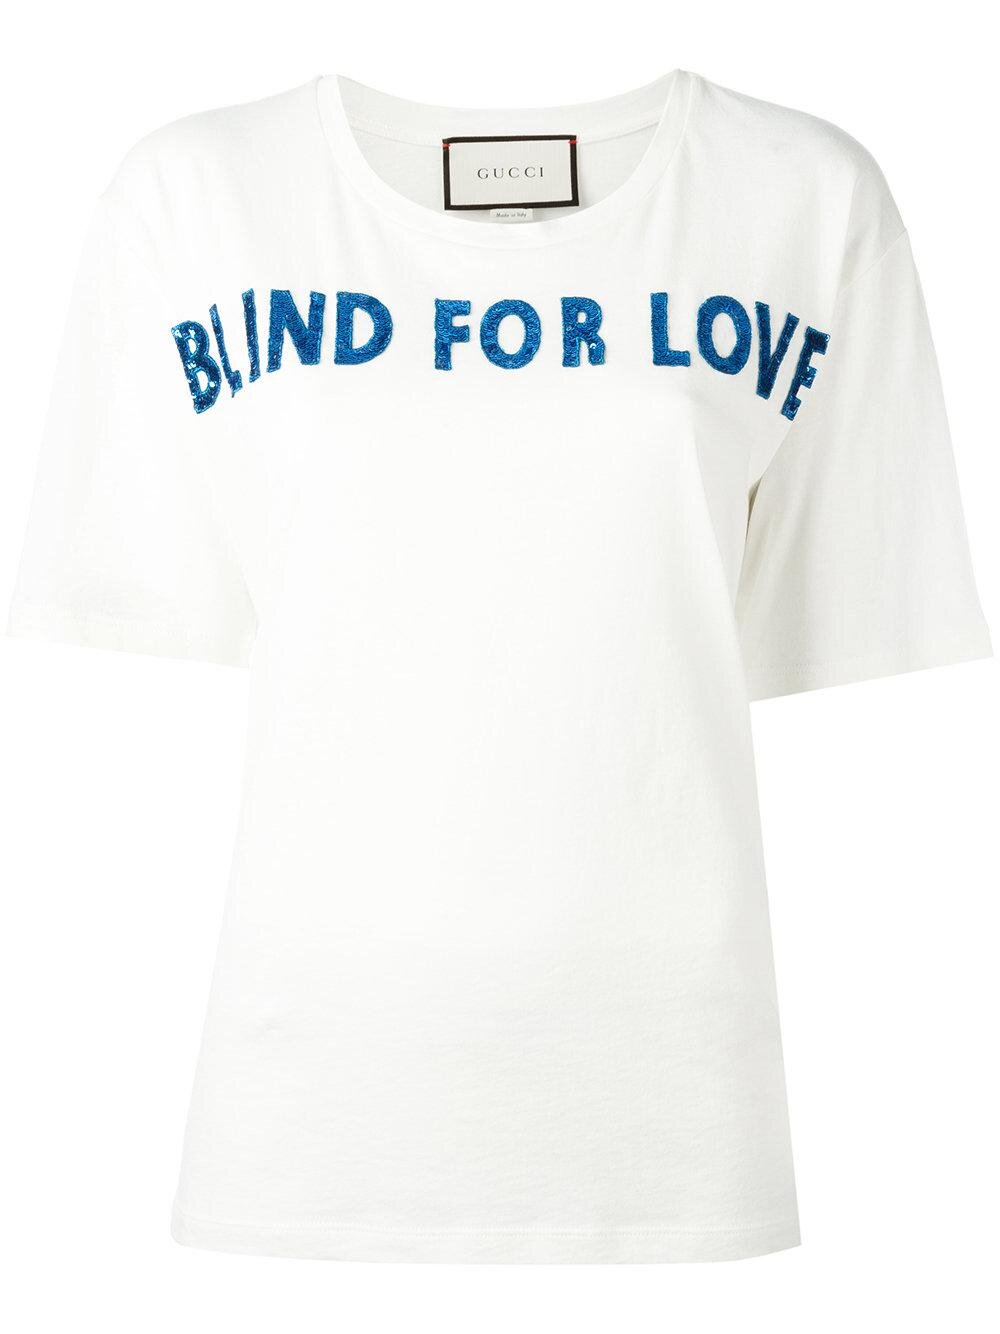 Gucci Blind For Love T-Shirt 